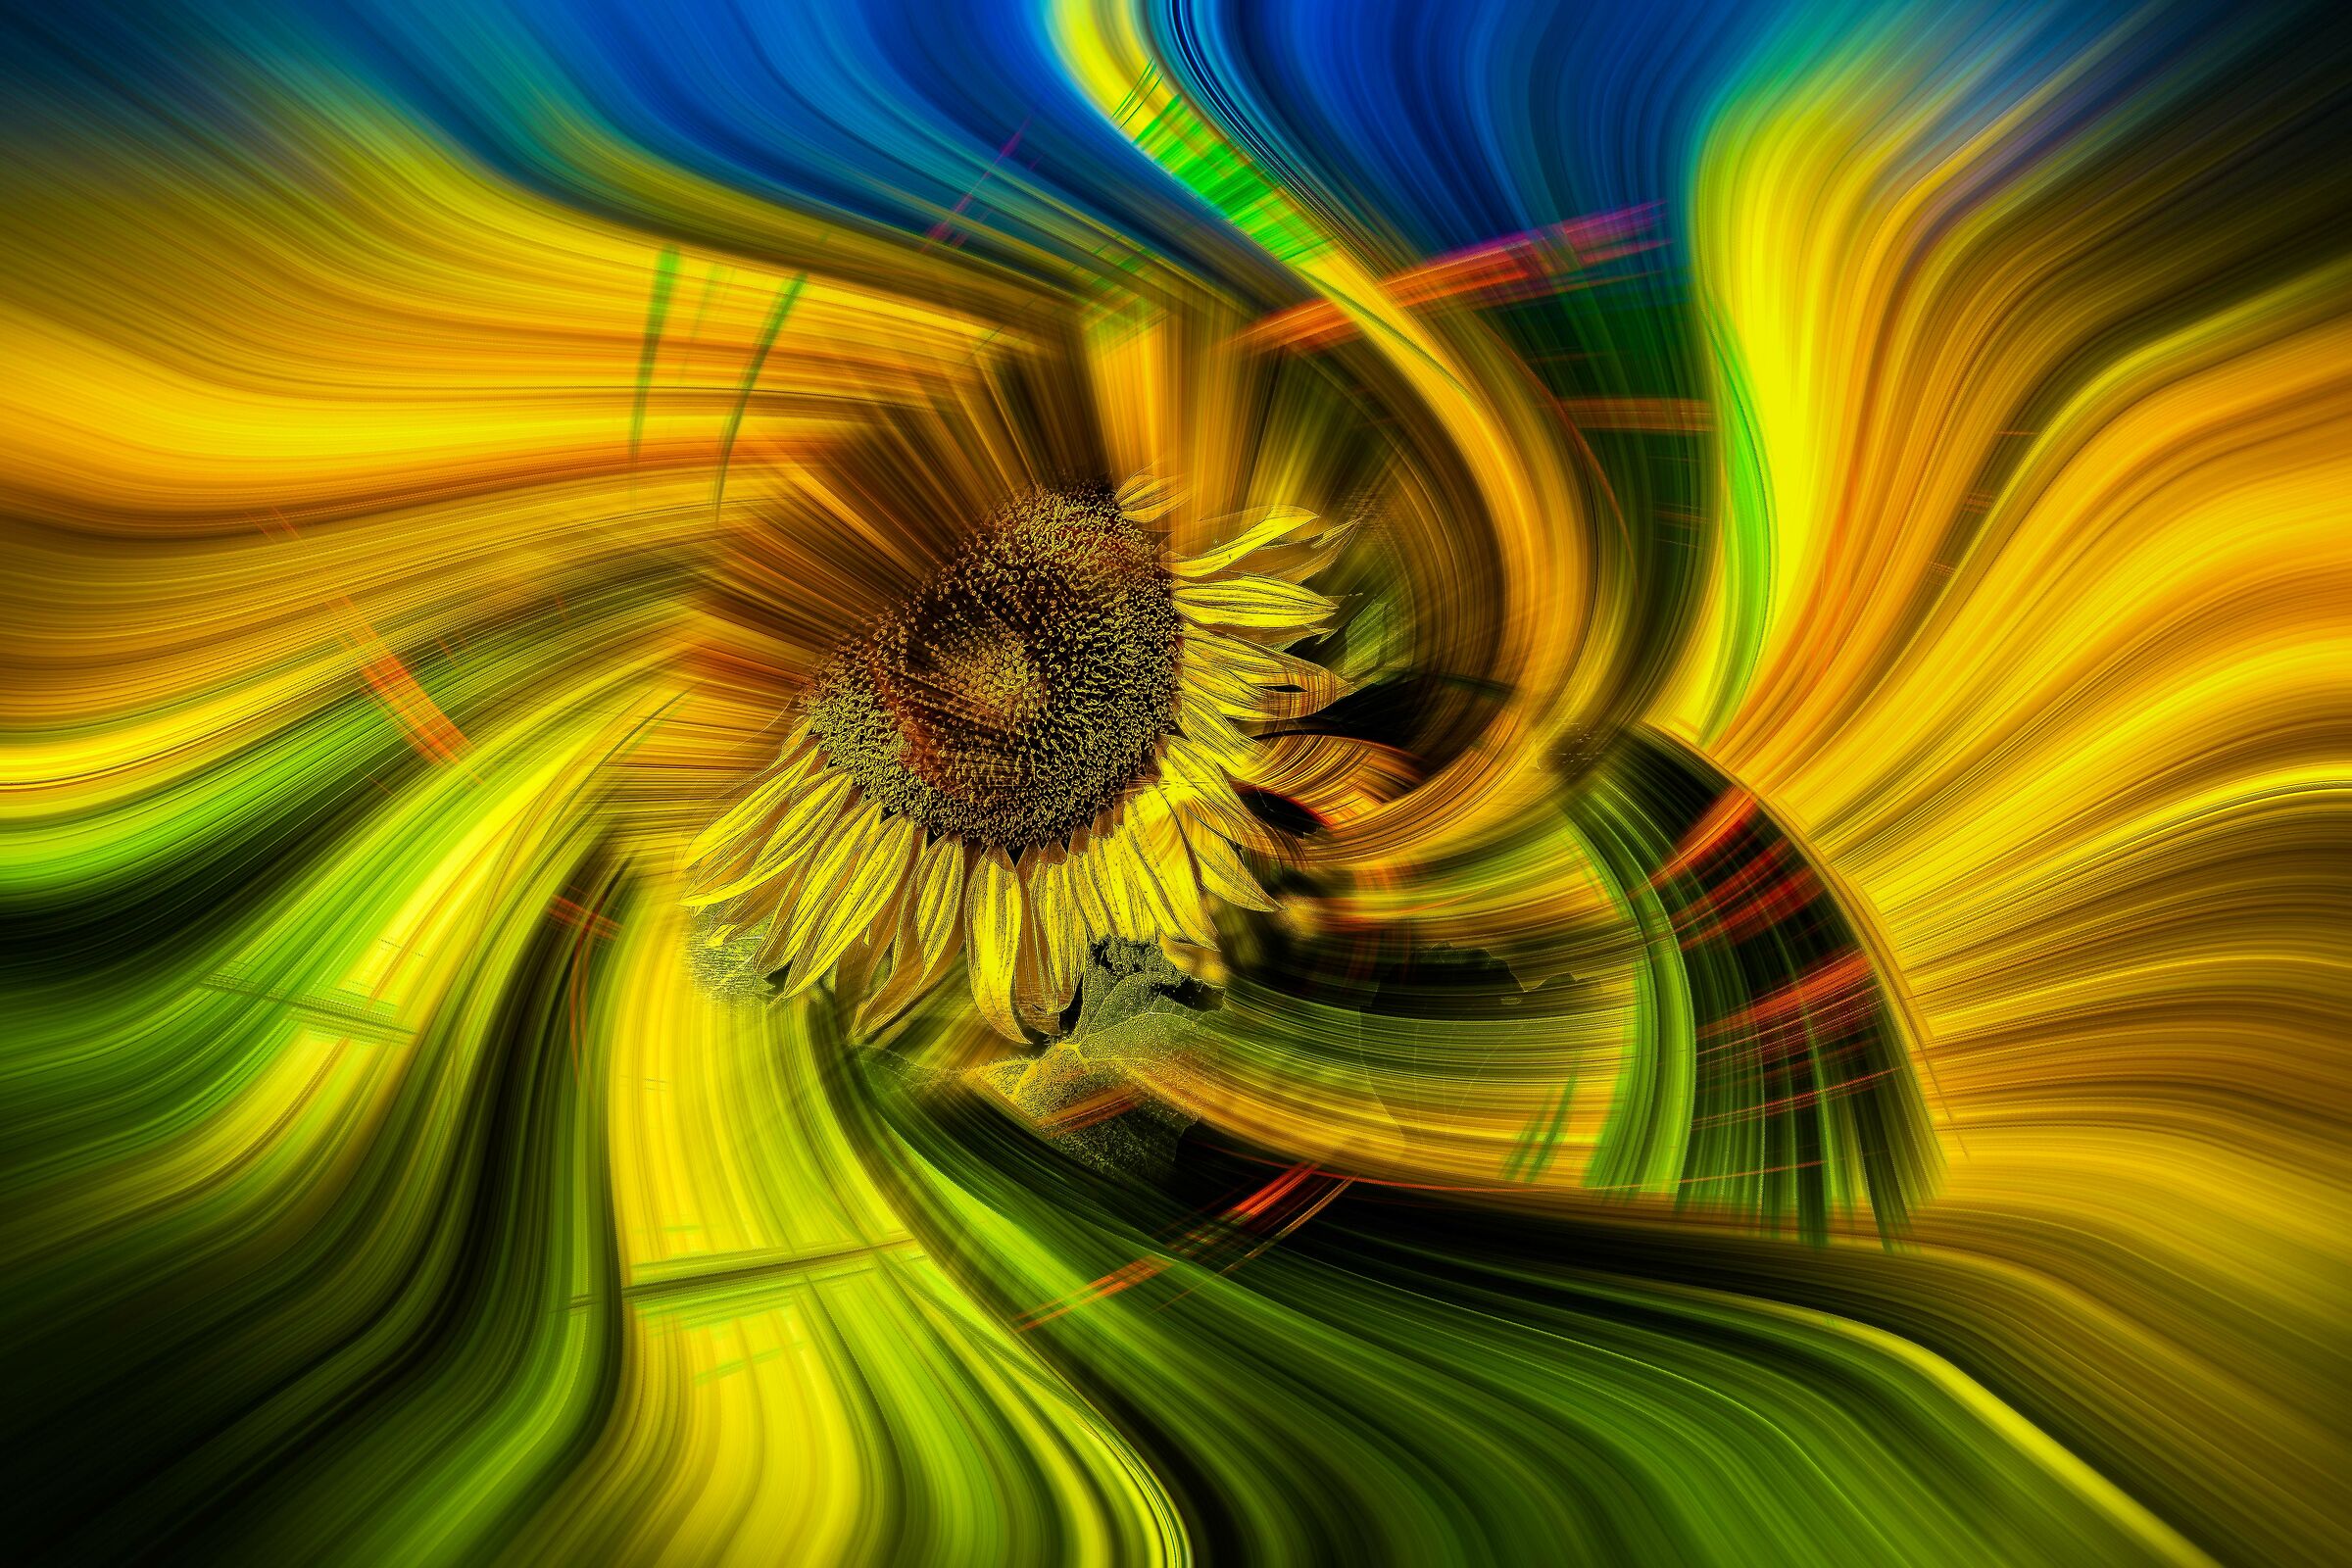 twirl effect with sunflower...